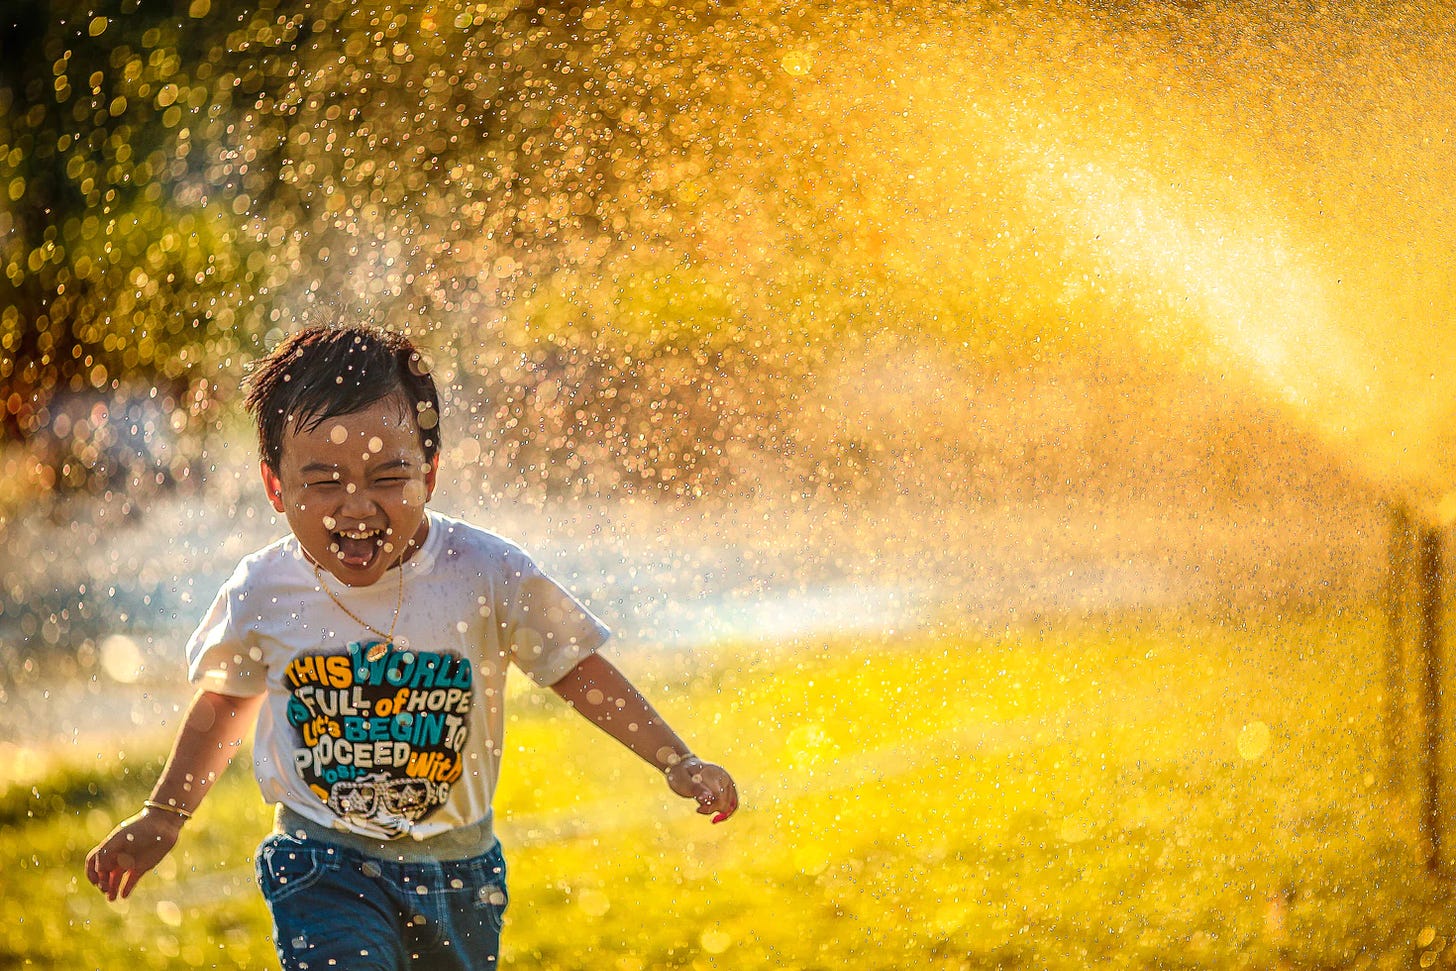 Little boy playing in water and sunshine. 